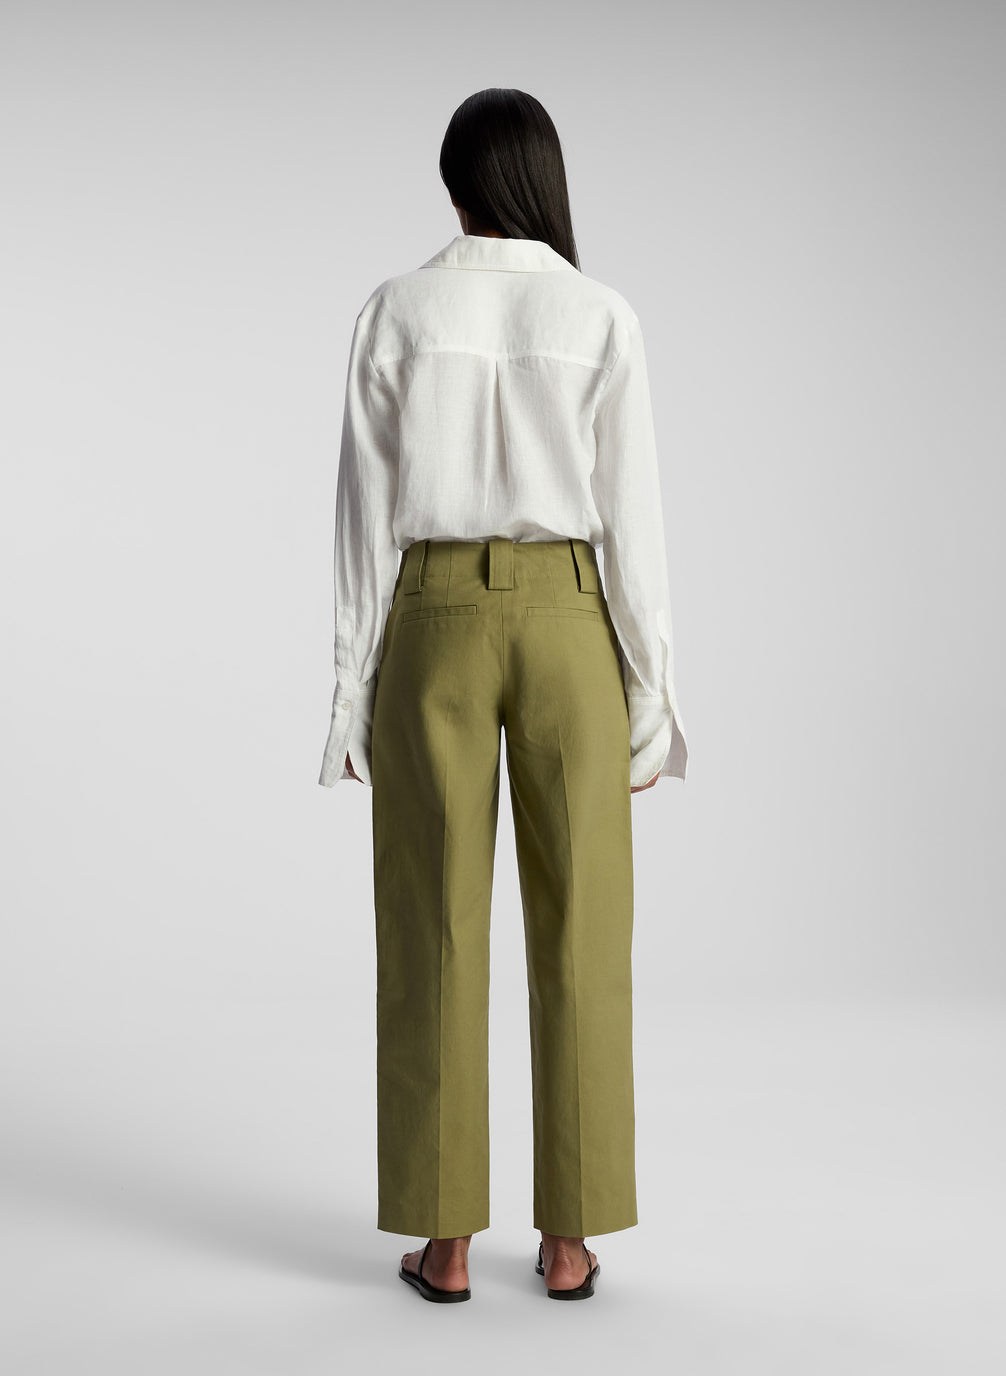 back view of woman wearing white button down shirt and olive pants